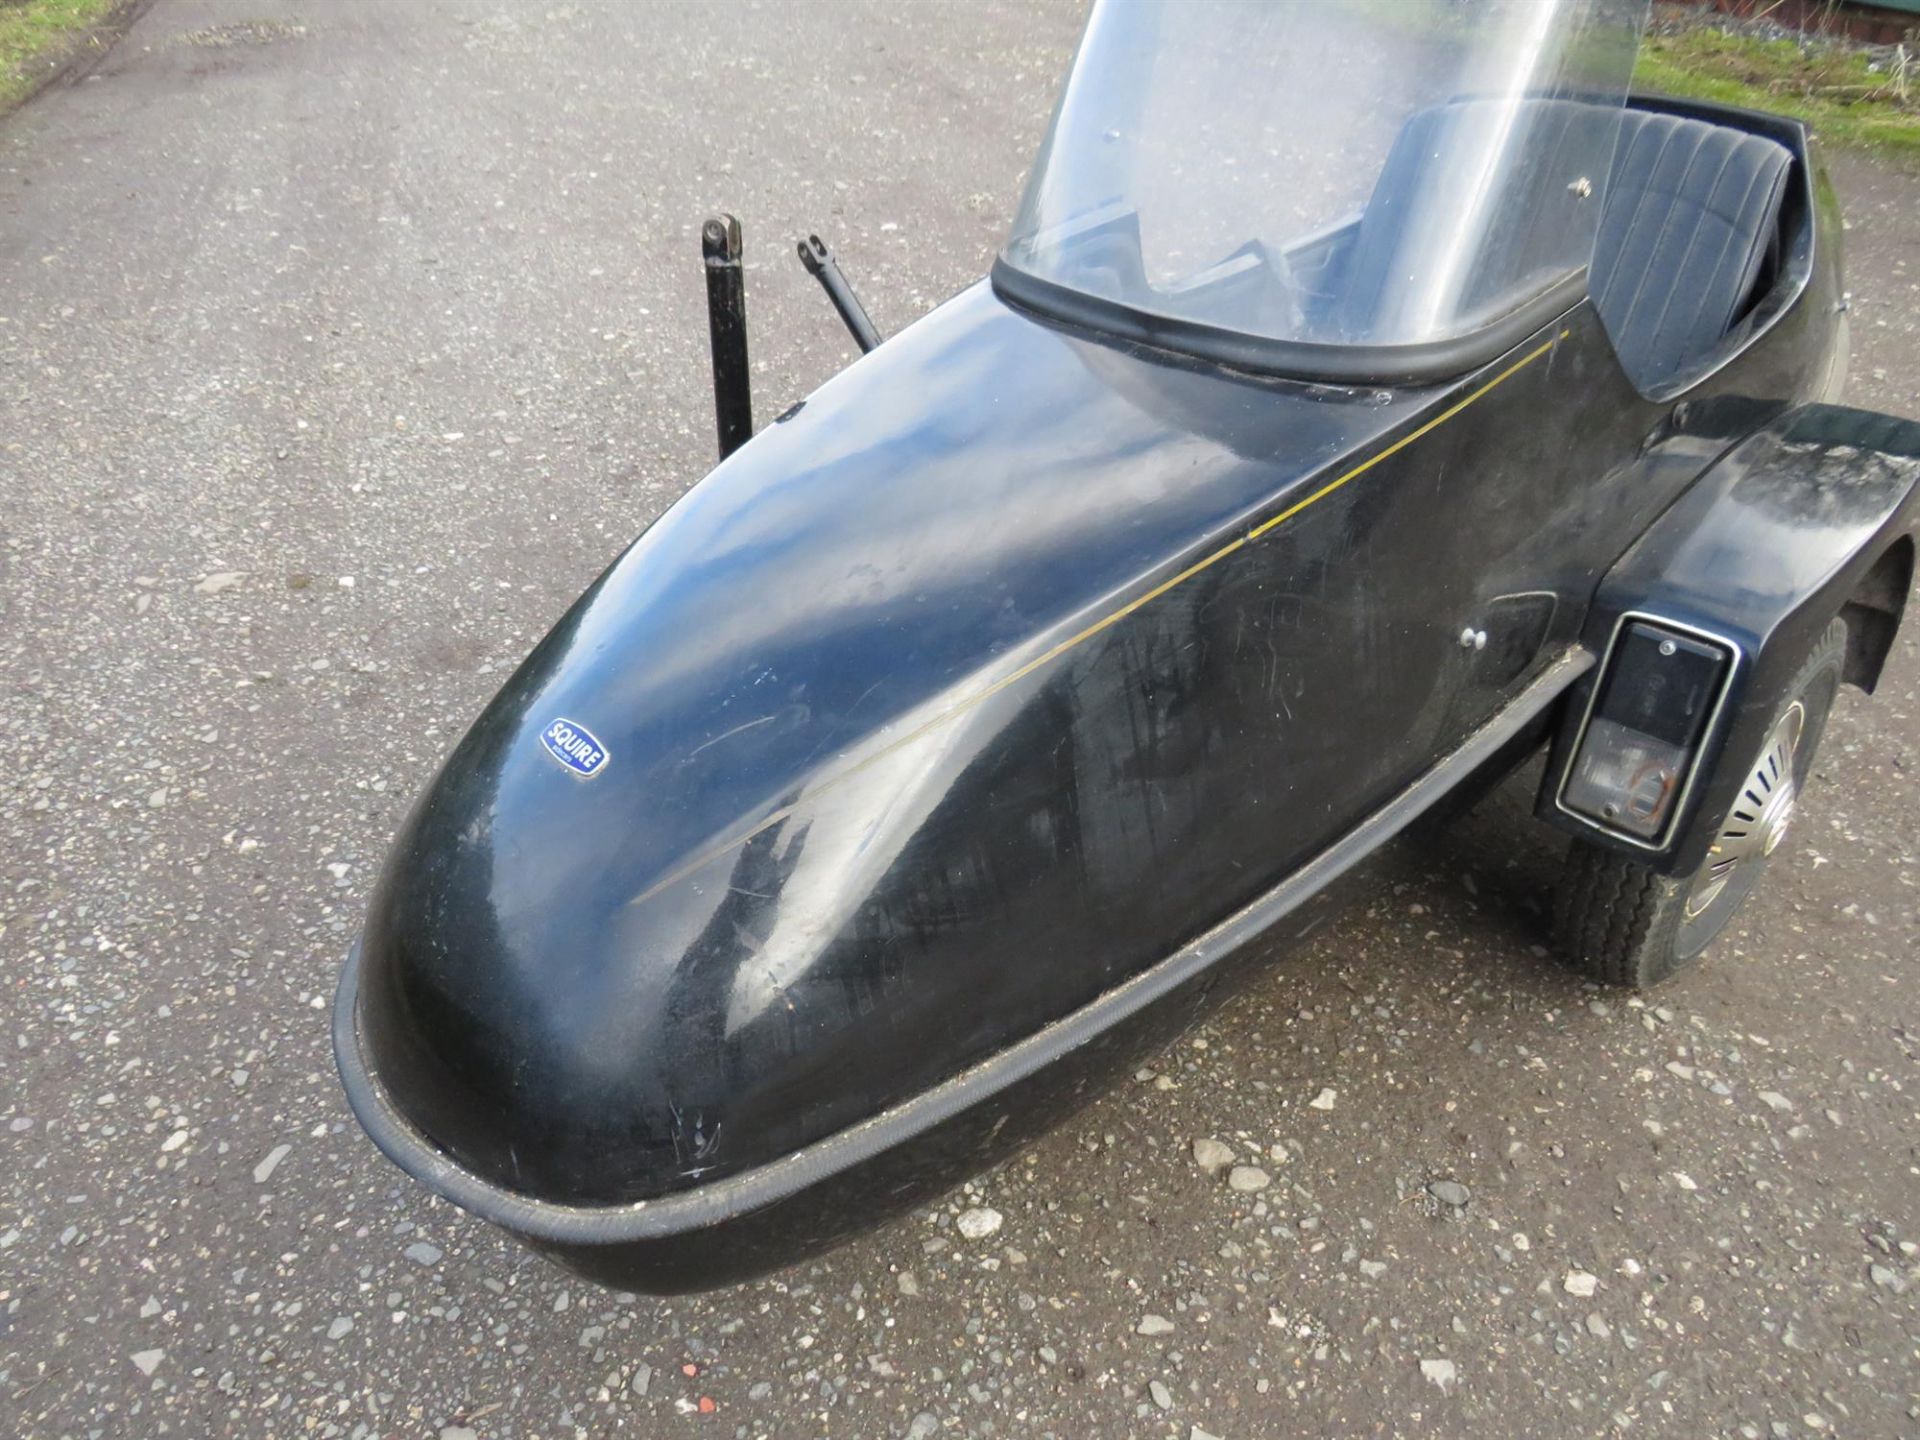 c.1980 Squire Sidecar - Image 4 of 10